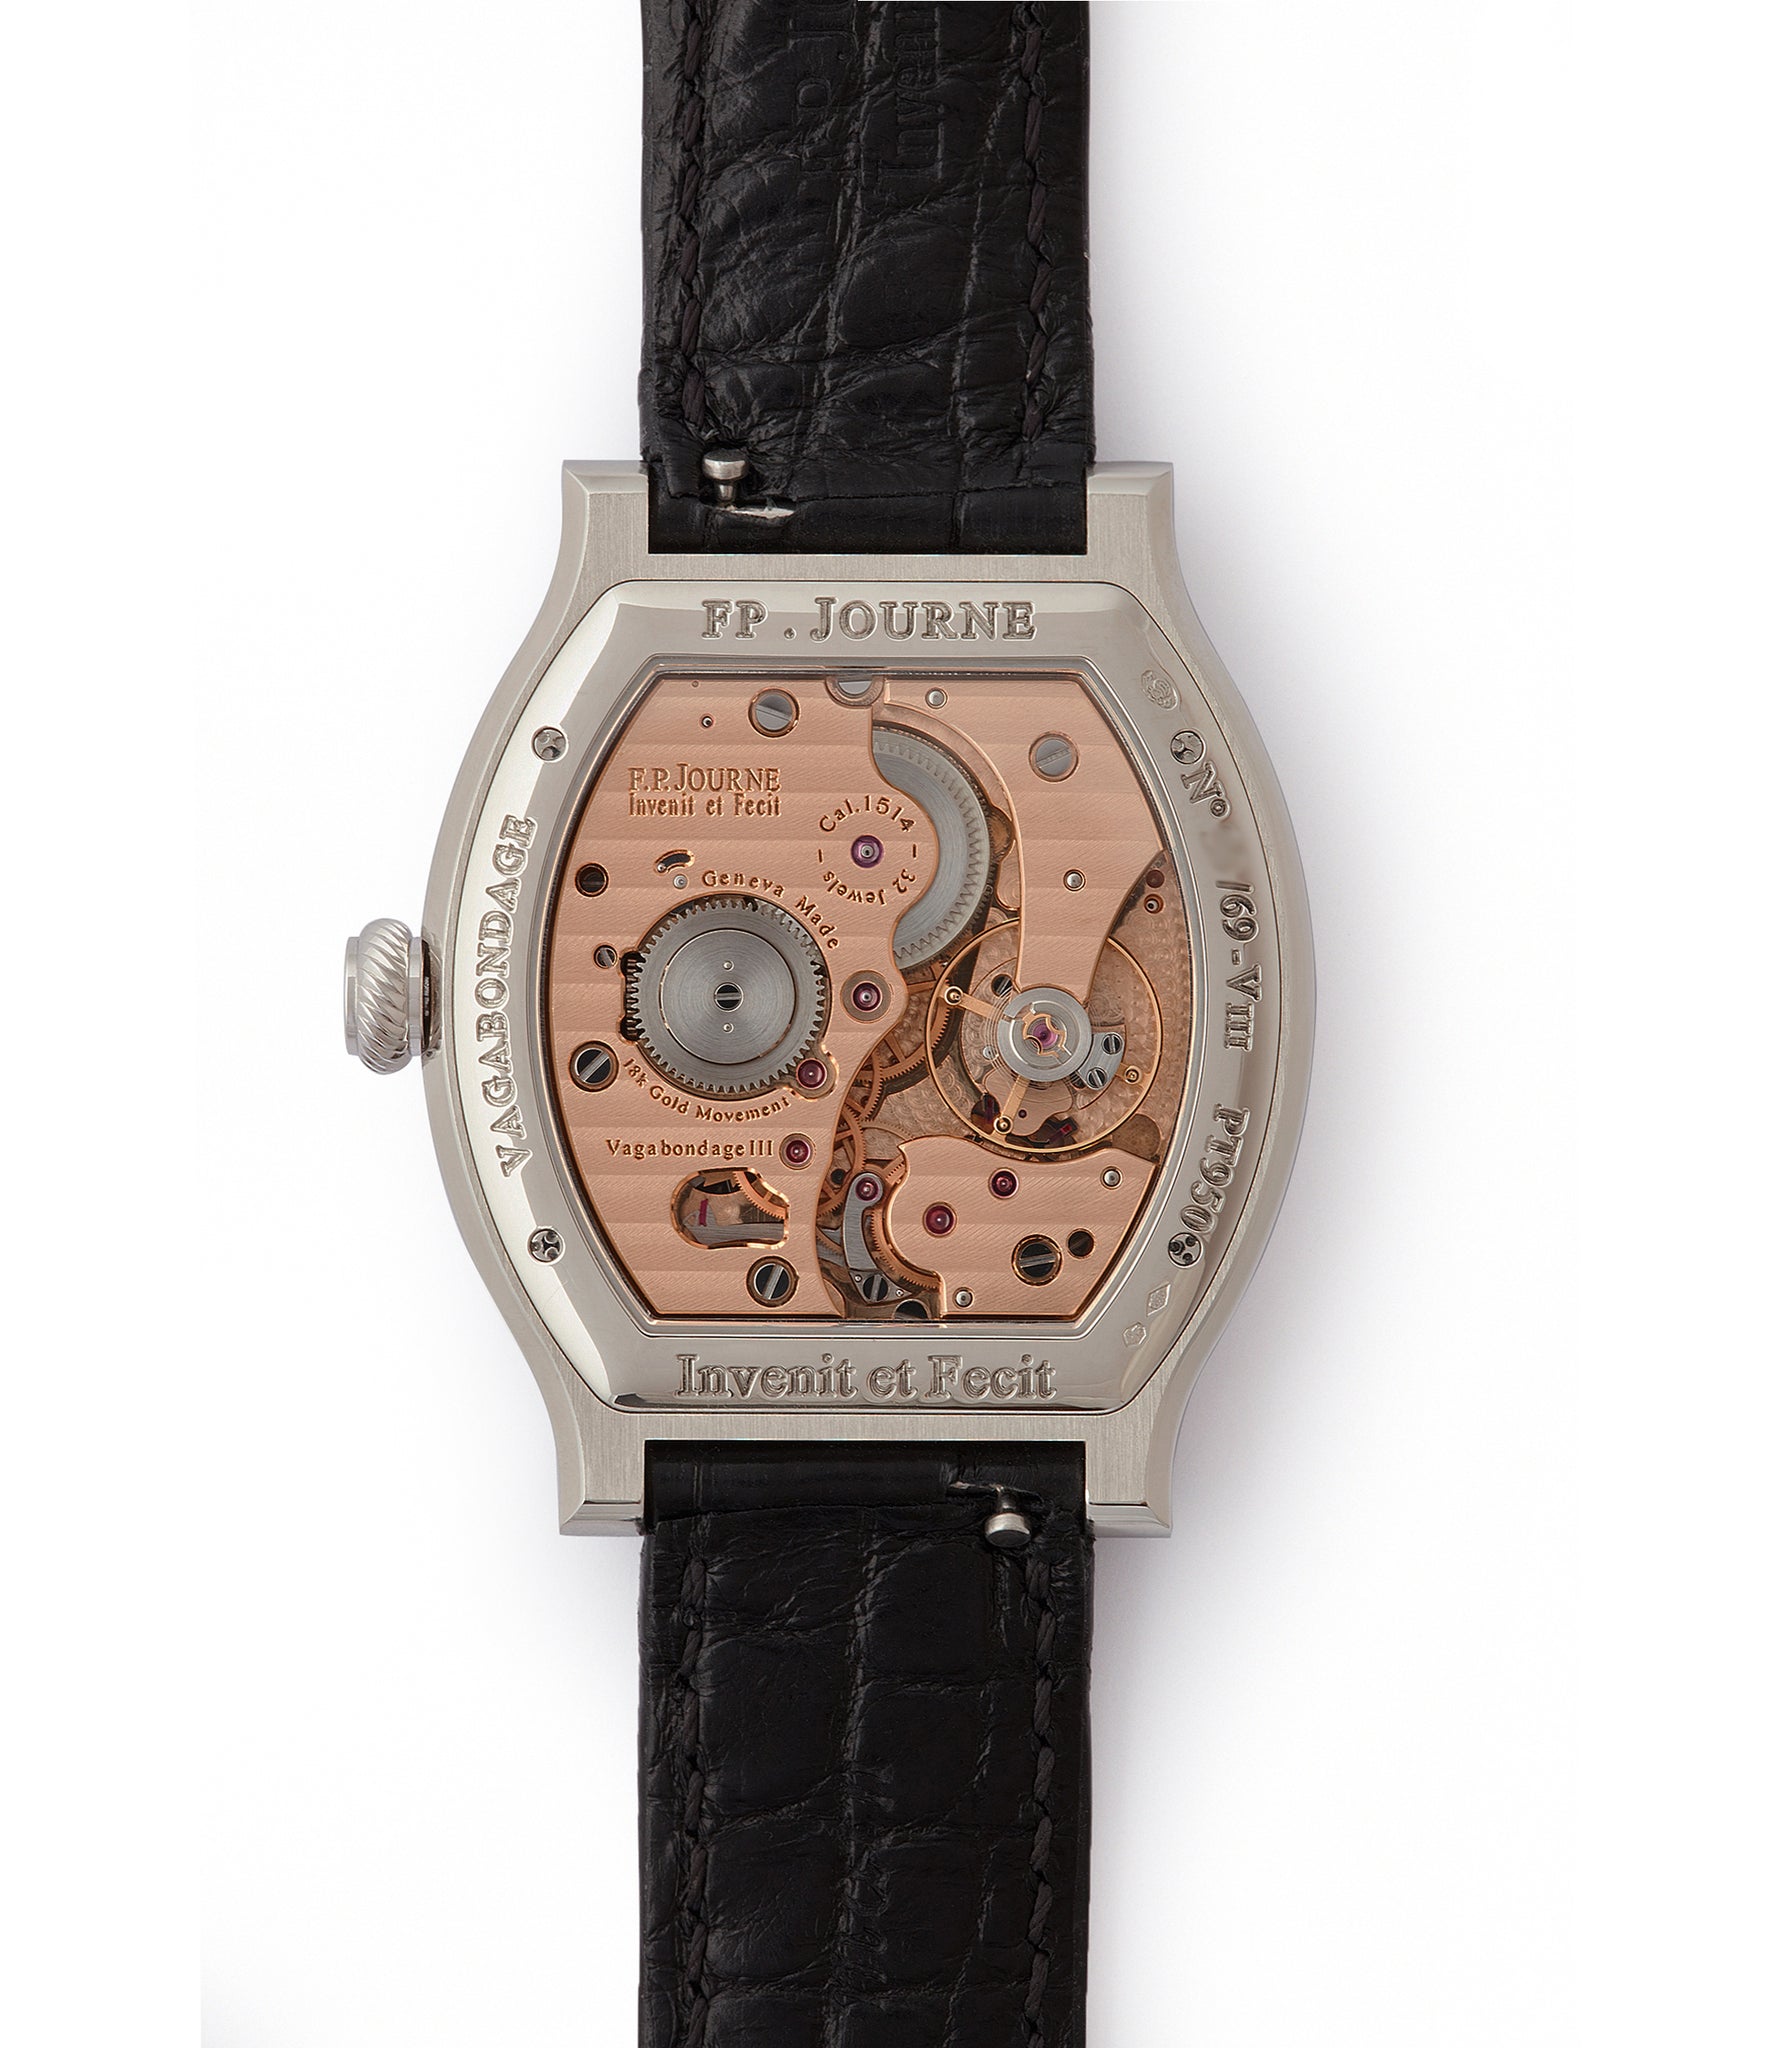 1-minute remontoire F. P. Journe Vagabondage 3 jumping hours seconds Limited edition of 69 platinum rare watch from 2018 for sale online at A Collected Man London UK specialist of independent watchmakers